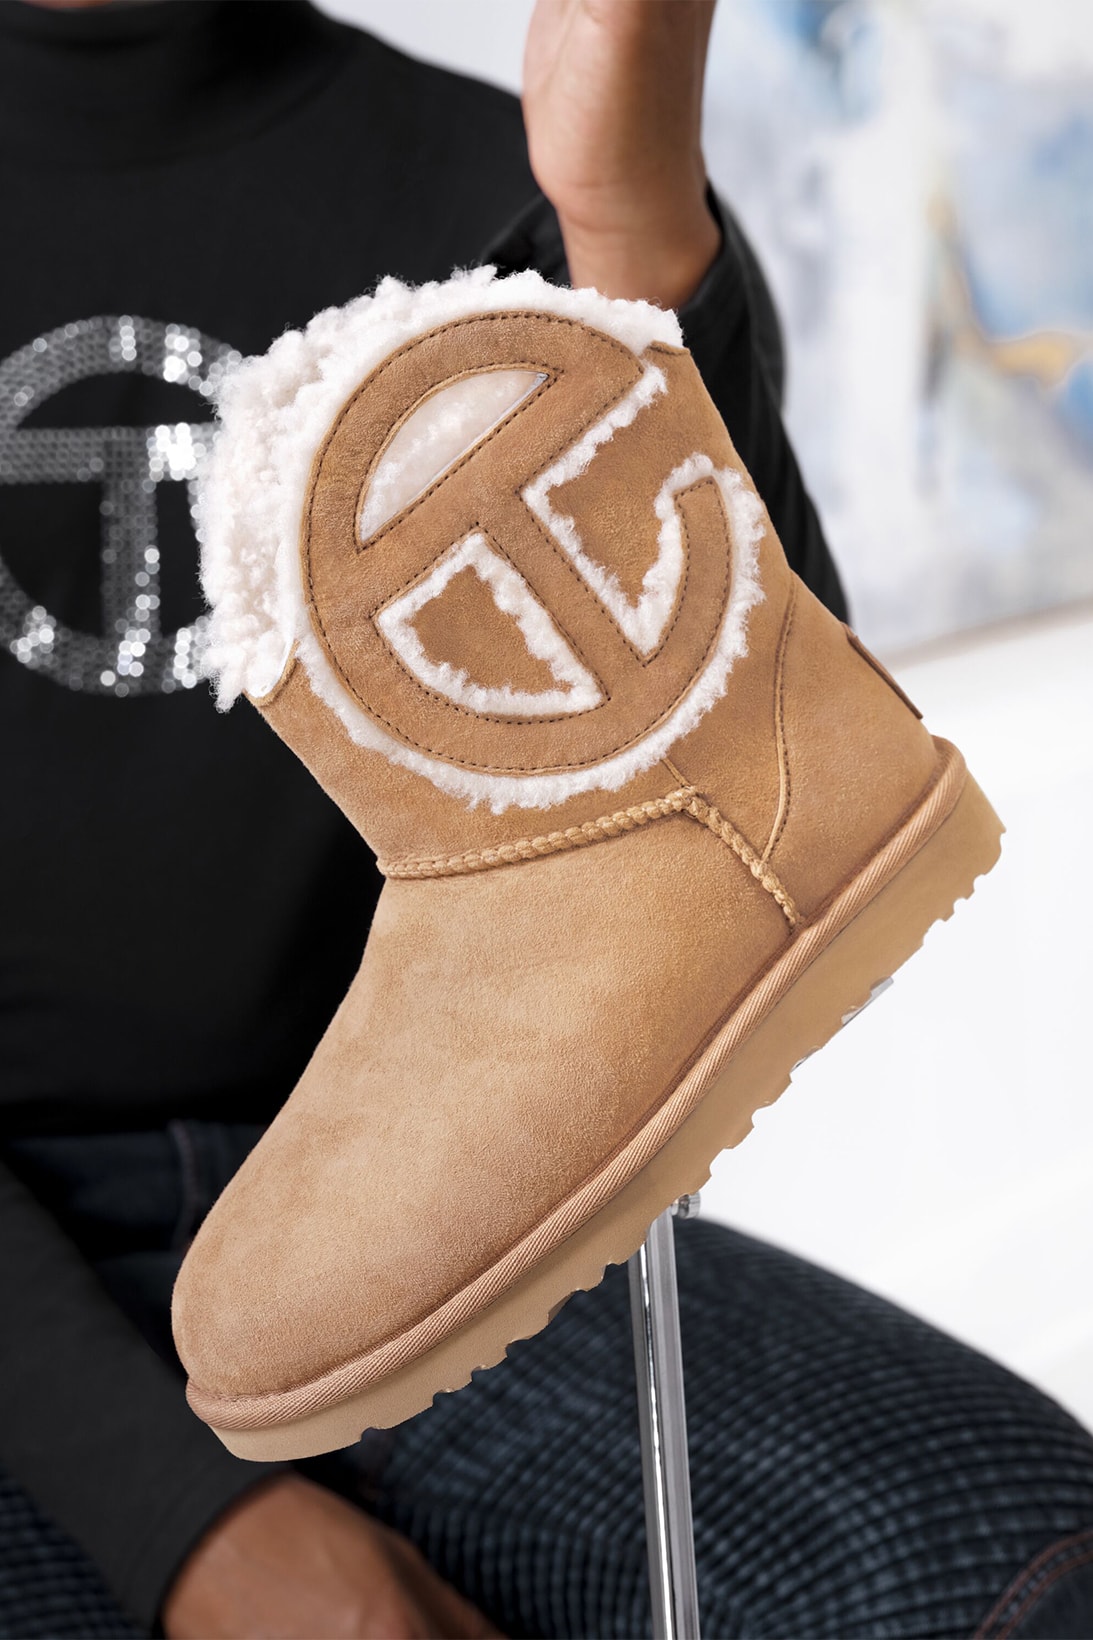 UGG Telfar Clemens Fall Winter 2021 Collection Collaboration Boots